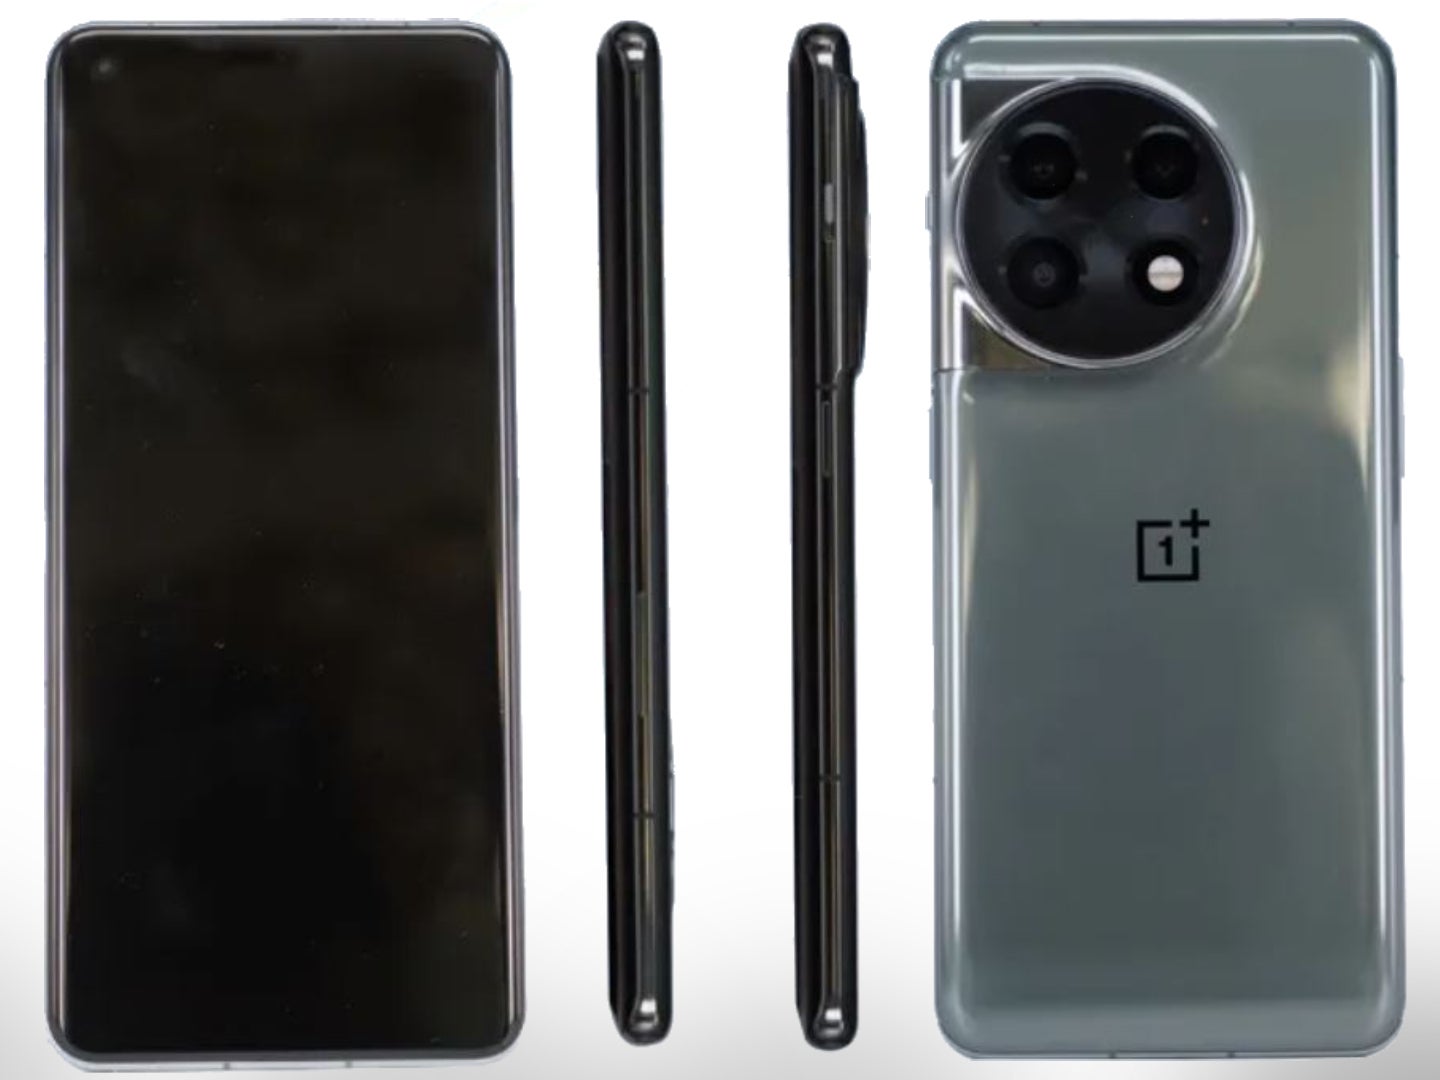 The OnePlus 11 from all sides, as per the TENAA certification images. - OnePlus 11 leaked photos showcase camera setup, alert slider and screen details